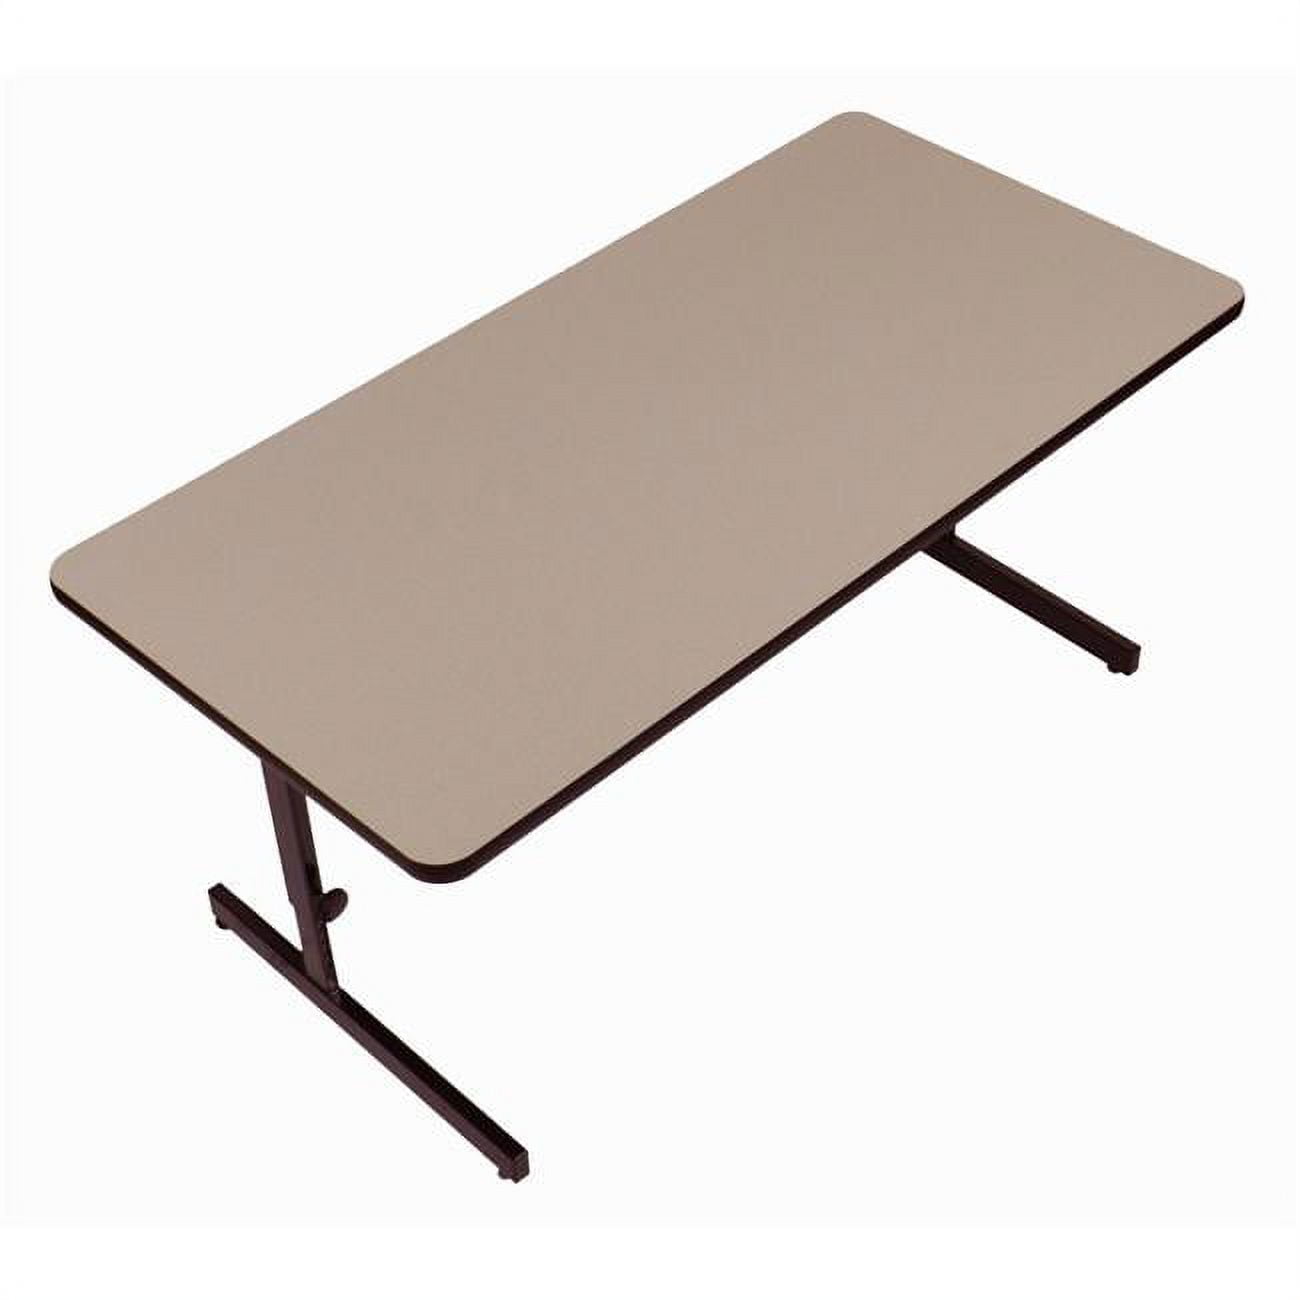 Csa3060tr-54 Adjustable Height 1.25 In. High Pressure Trapezoid Computer & Training Tables, Savannah Sand - 30 X 60 In.